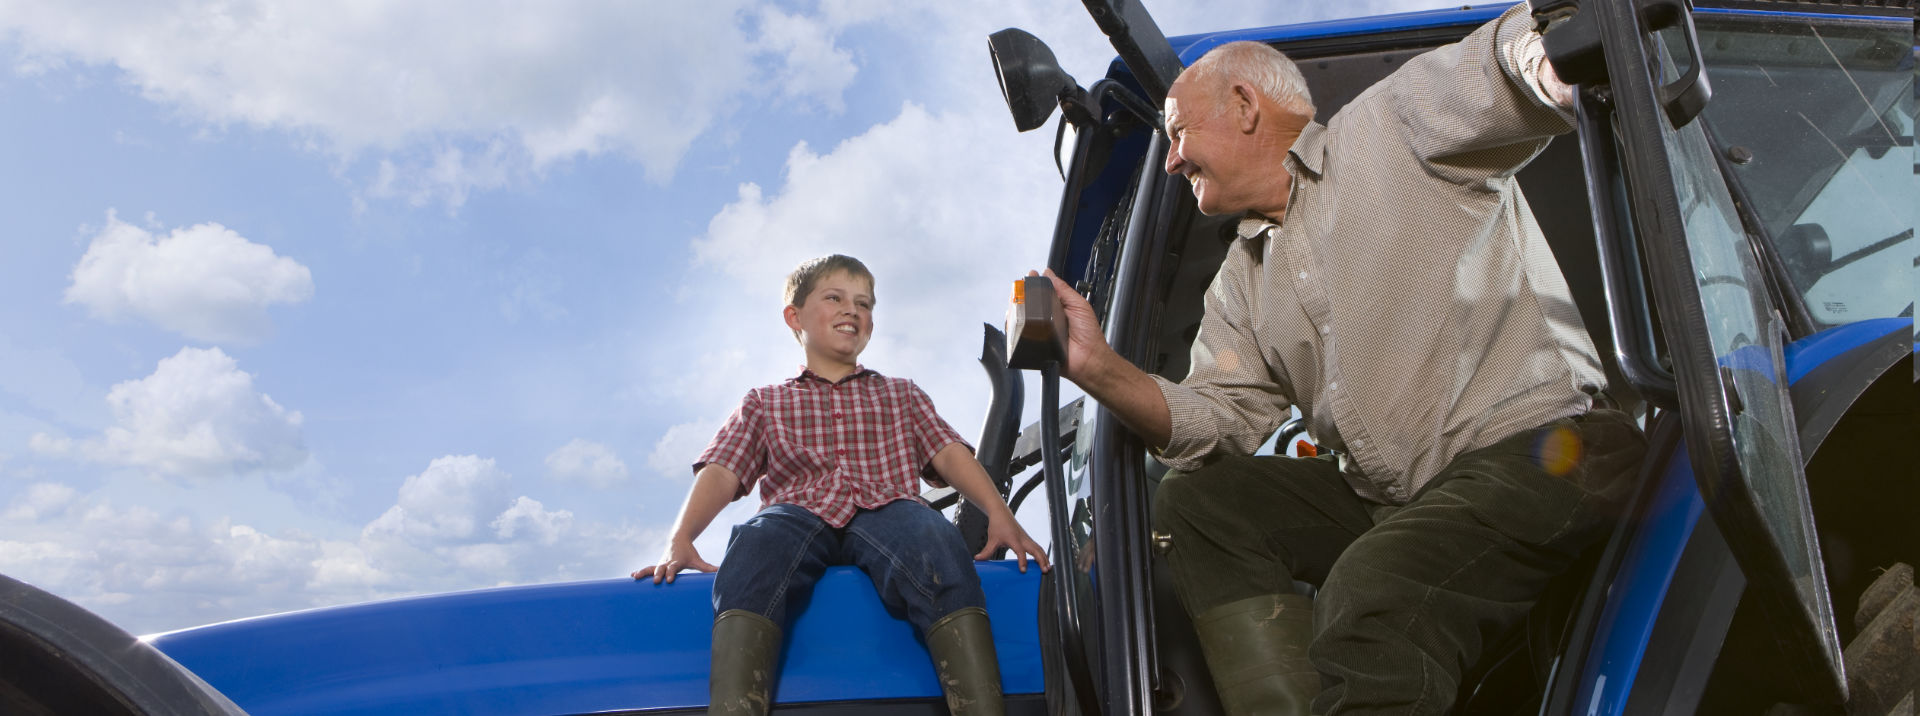 Grandfather and boy on tractor